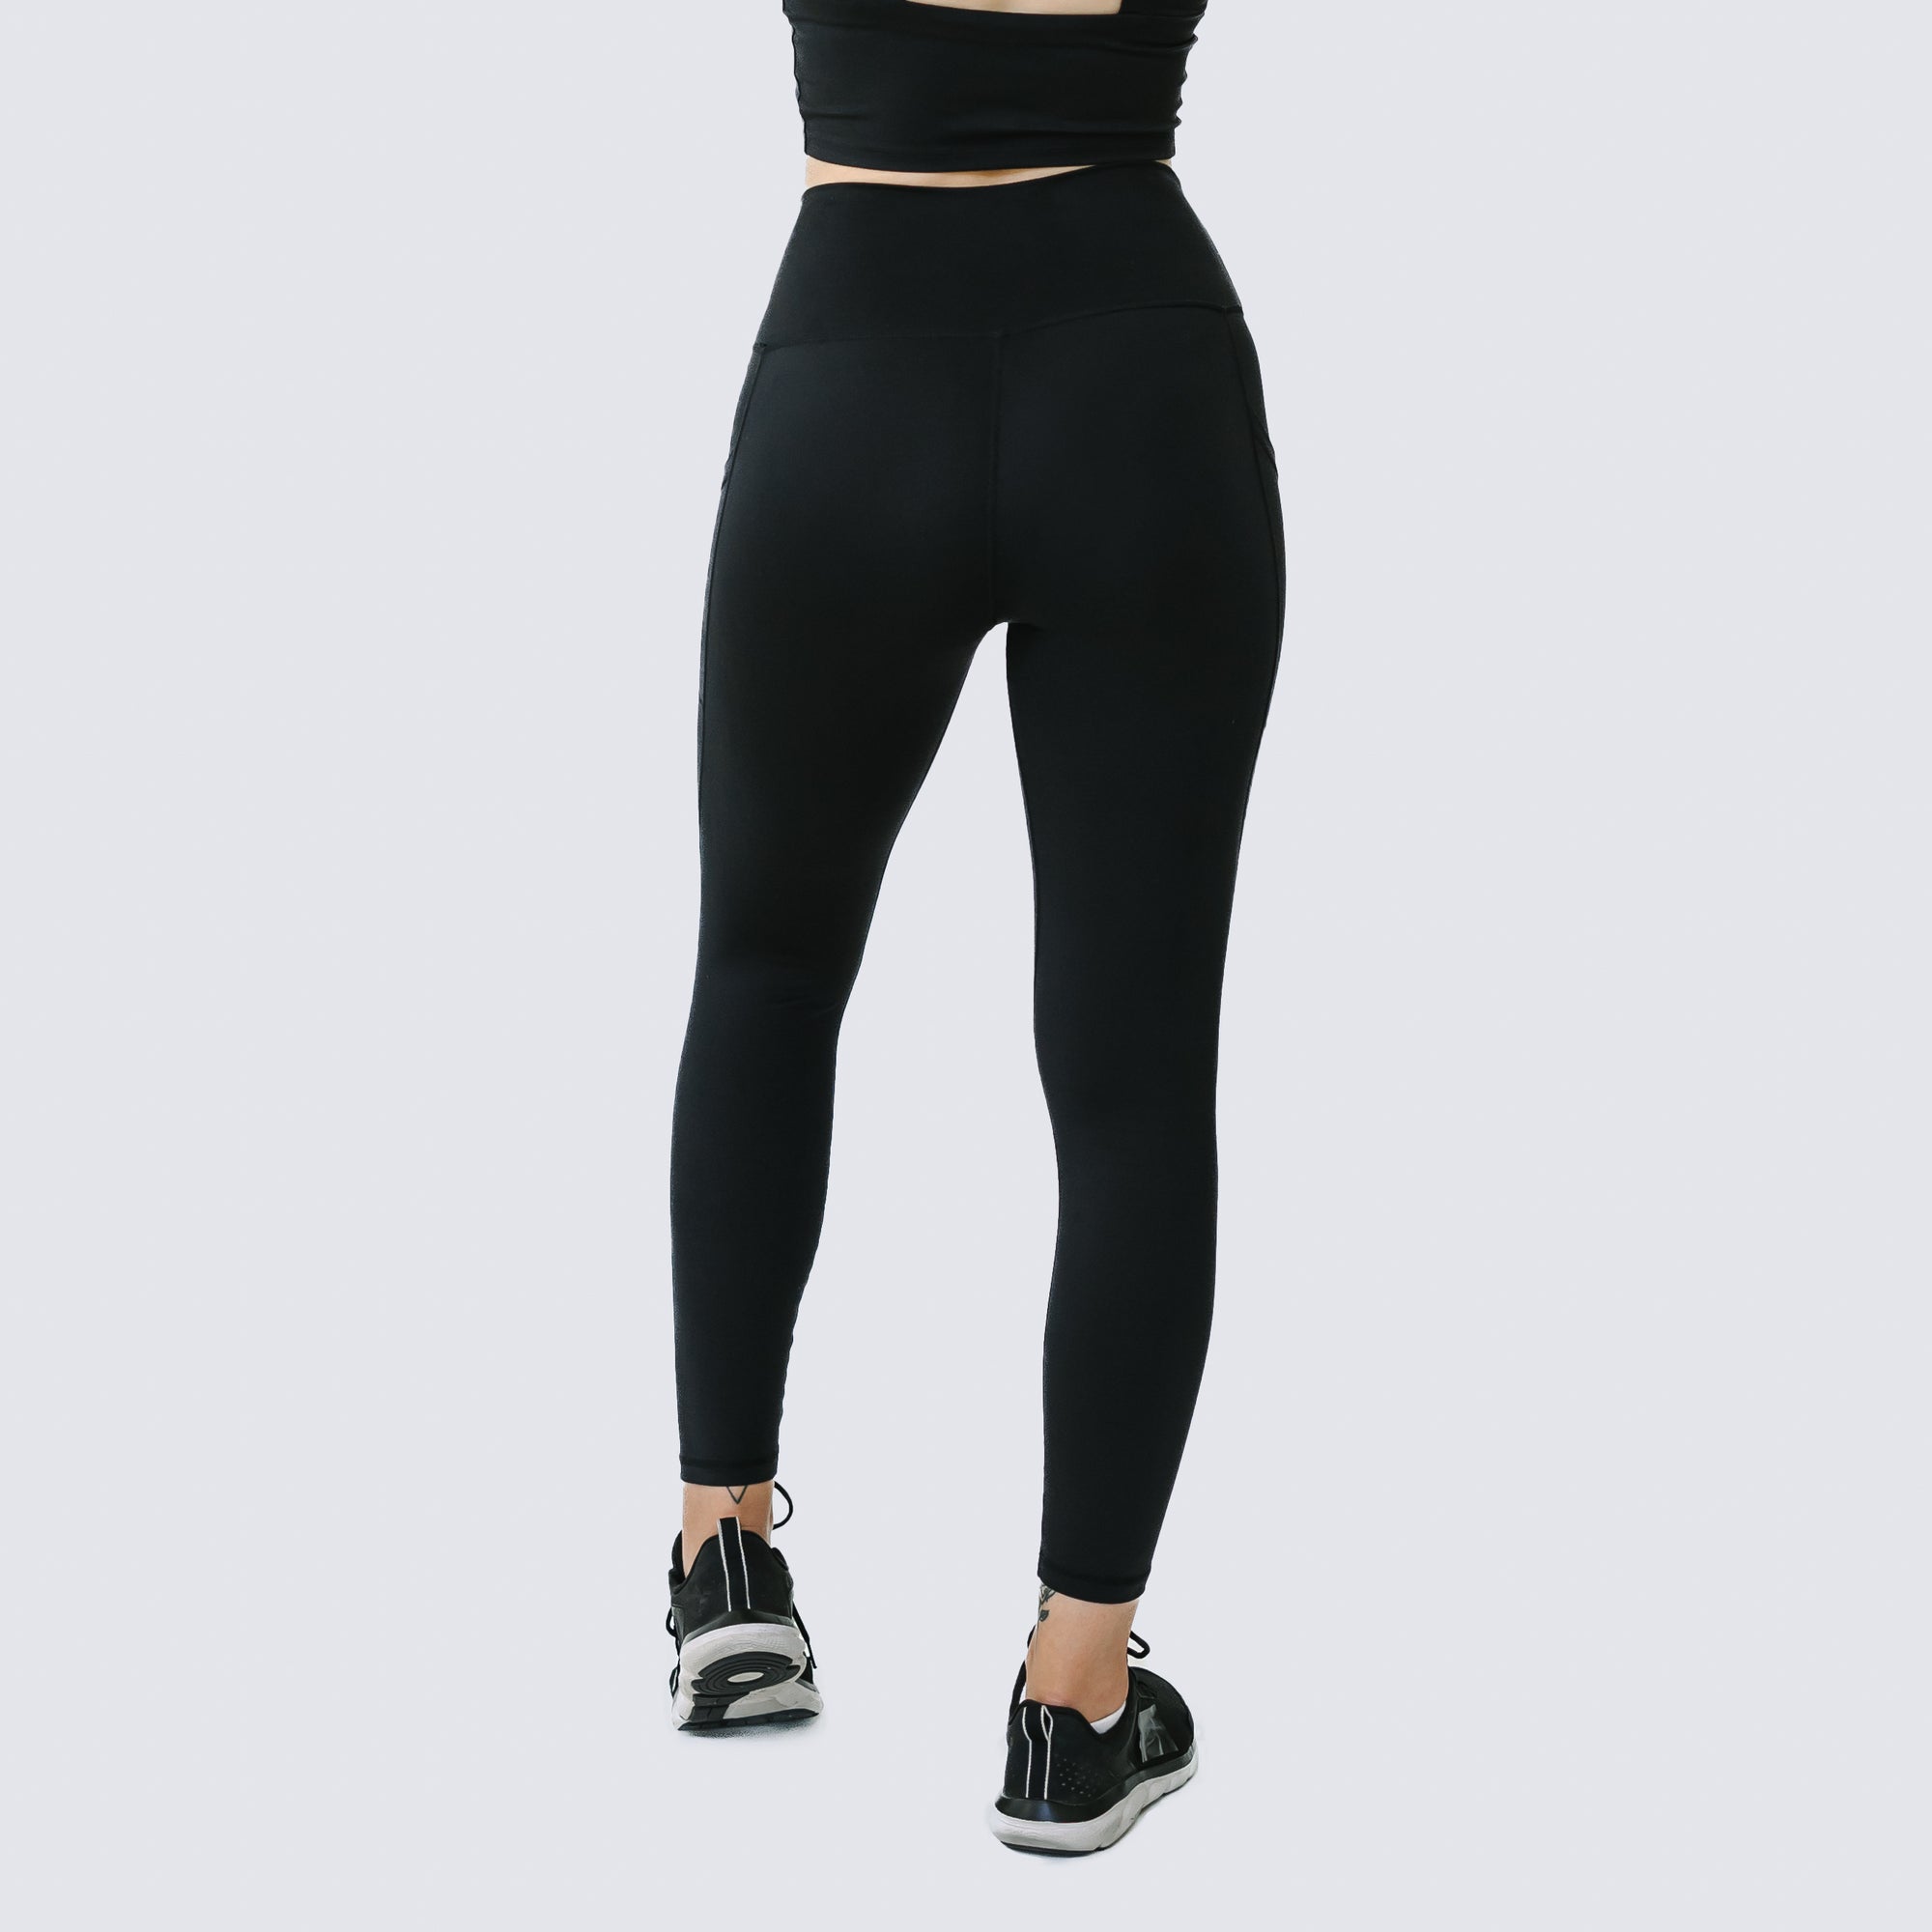 lovers praise £16 workout leggings that are 'super stretchy